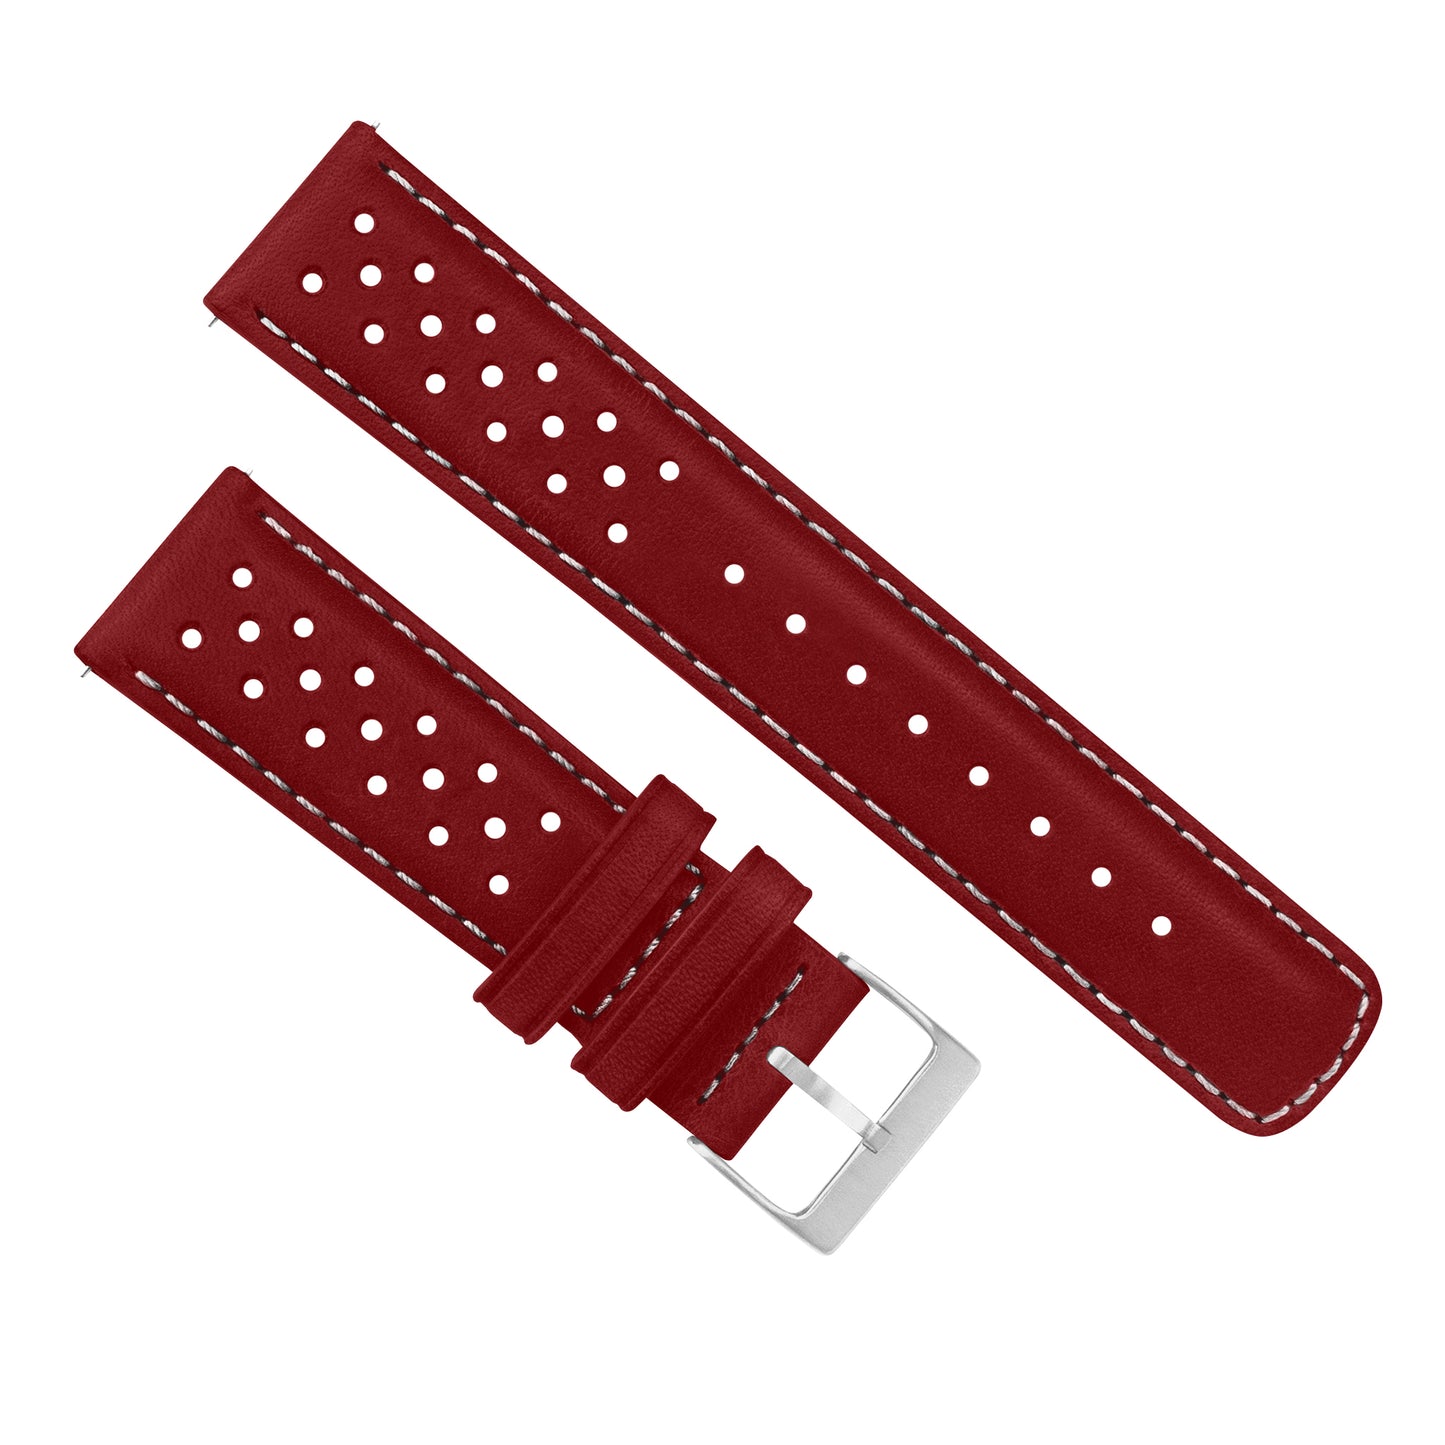 Fossil Gen 5 Racing Horween Leather Crimson Red Linen Stitch Watch Band